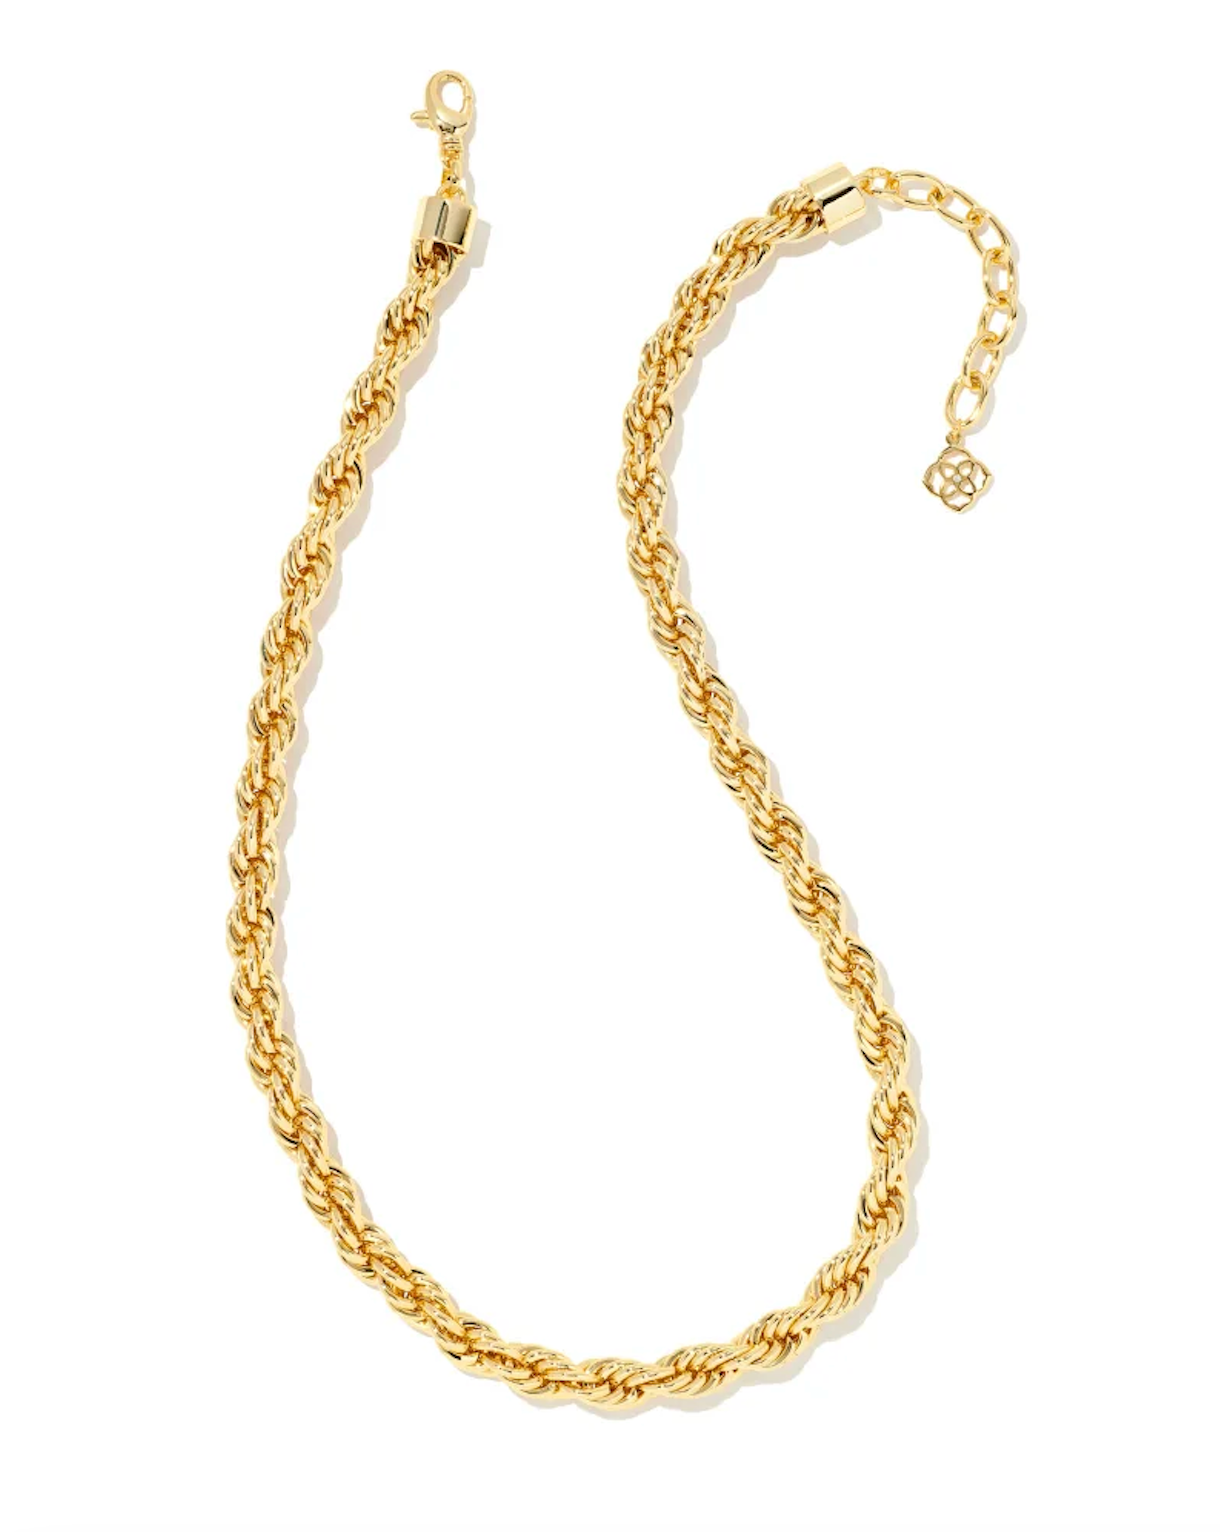 KENDRA SCOTT CAILEY CHAIN NECKLACE GOLD METAL